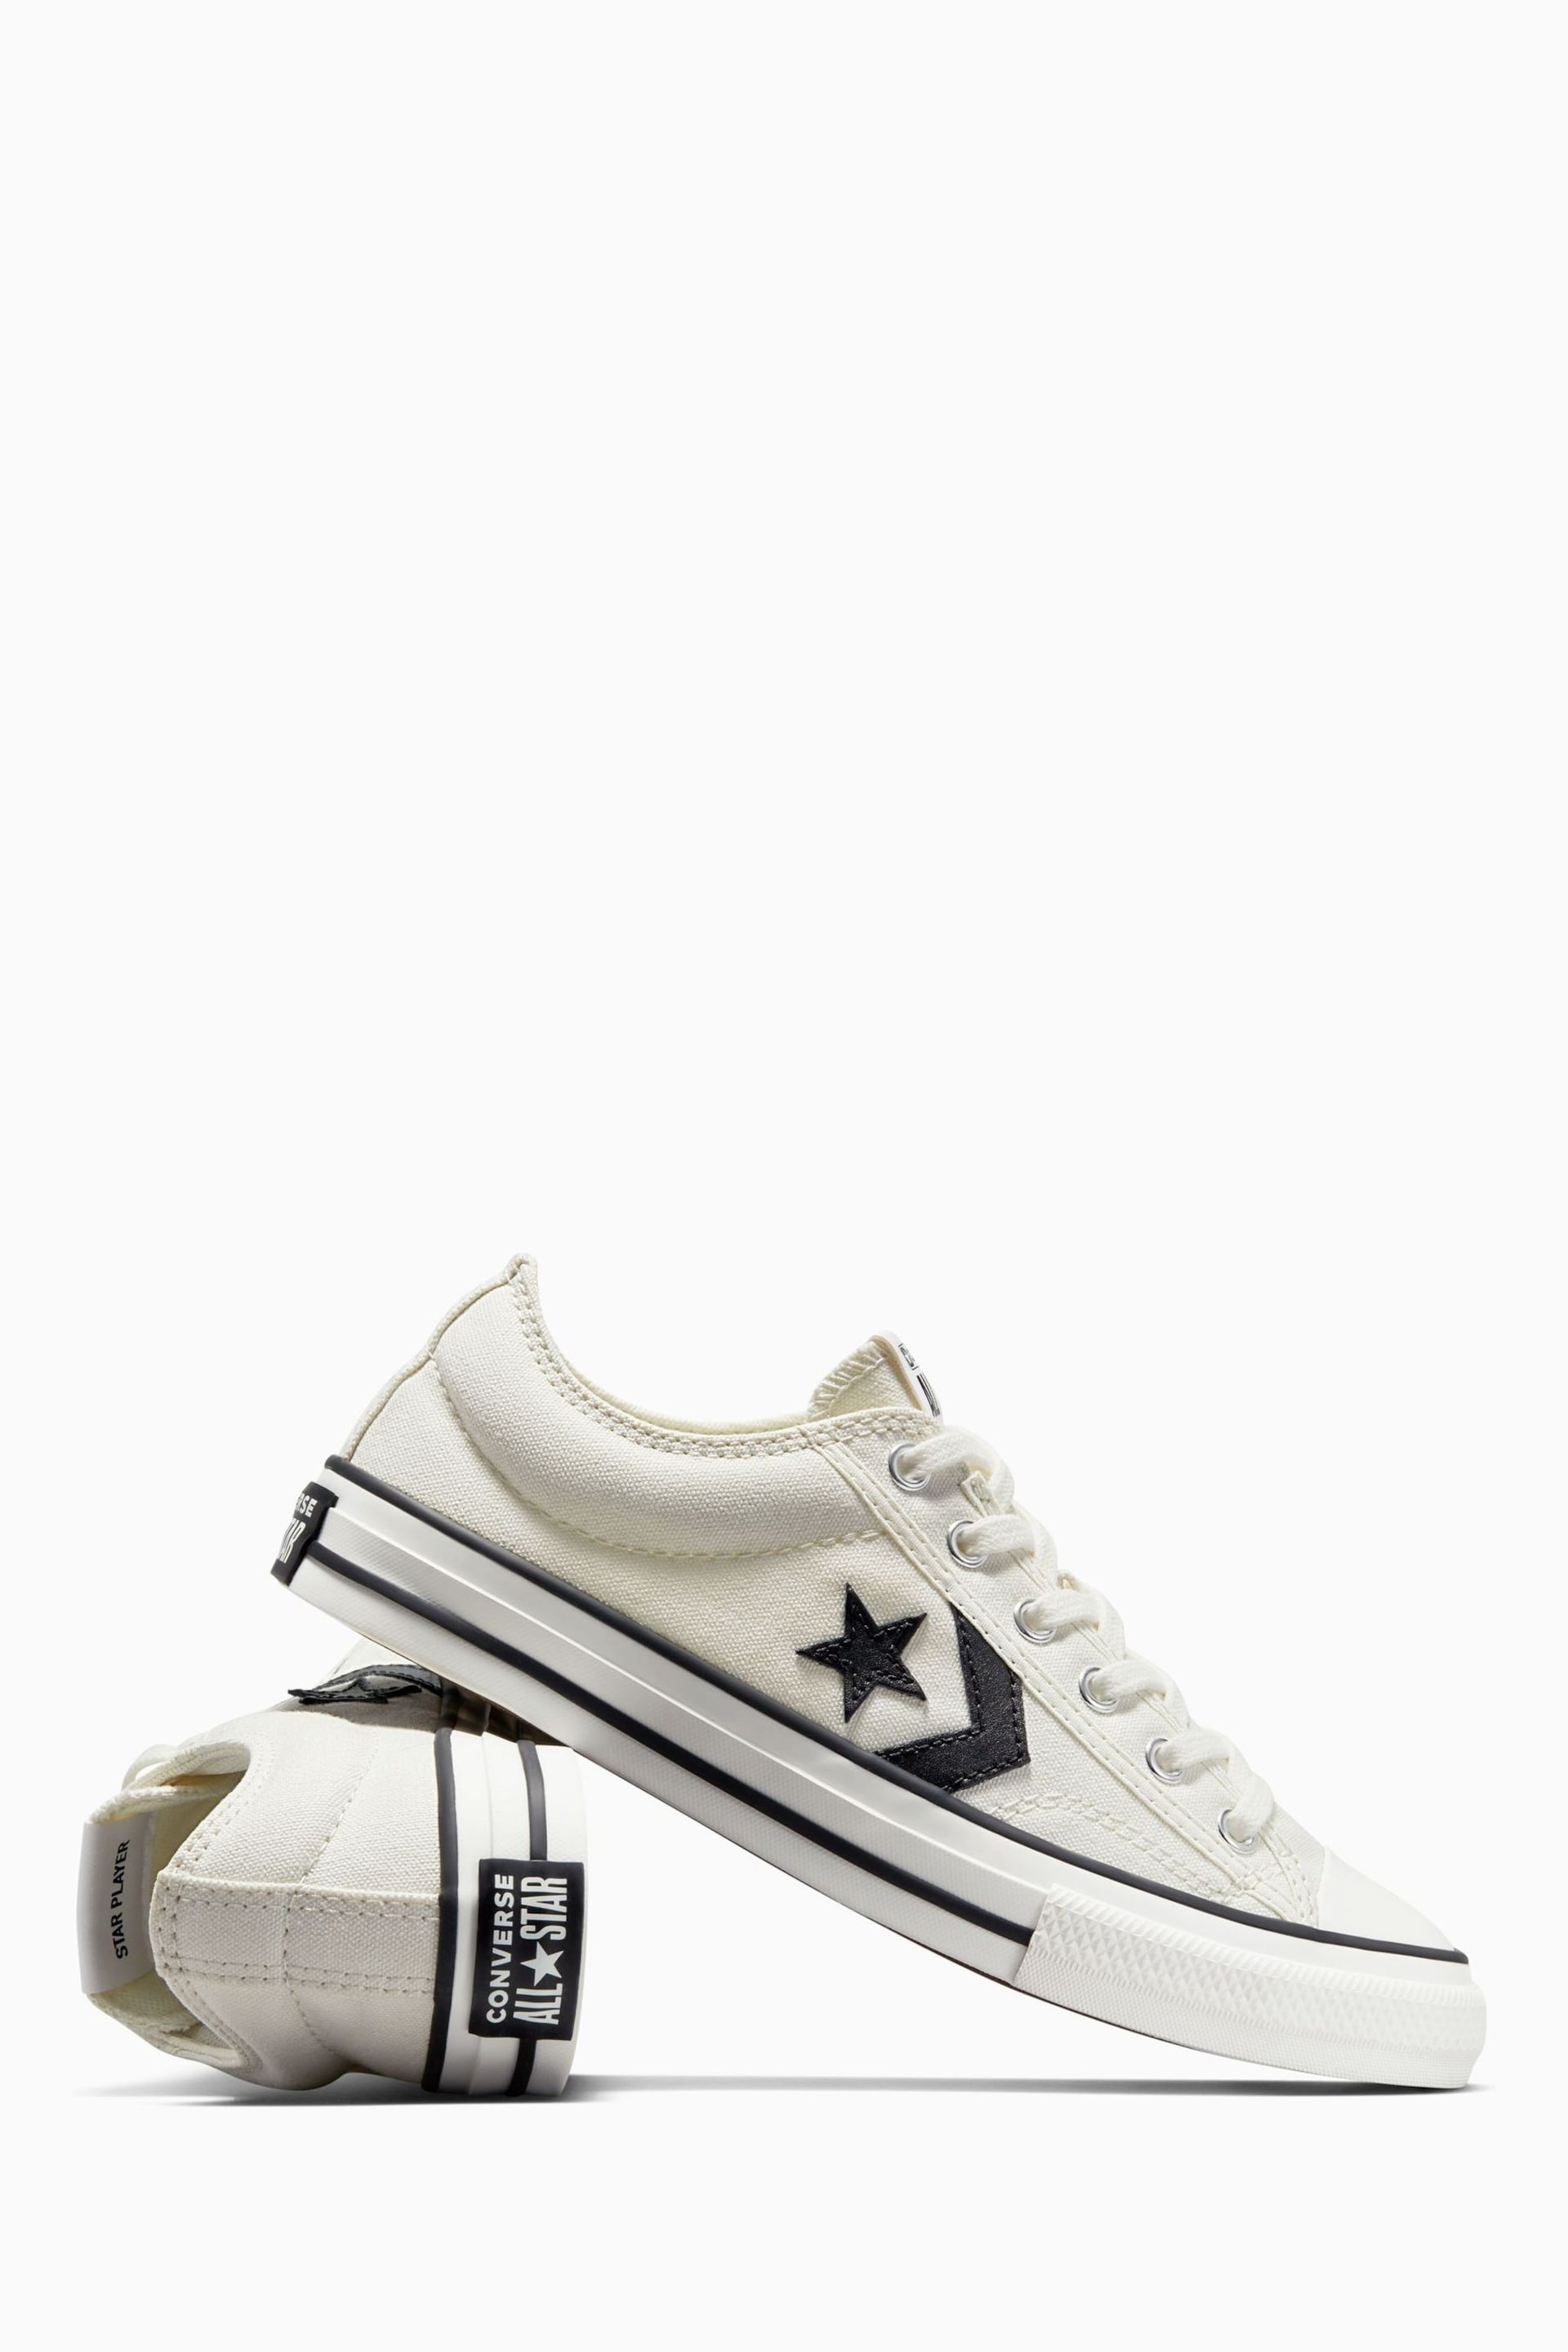 Converse White Youth Star Player 76 Trainers - Image 6 of 7